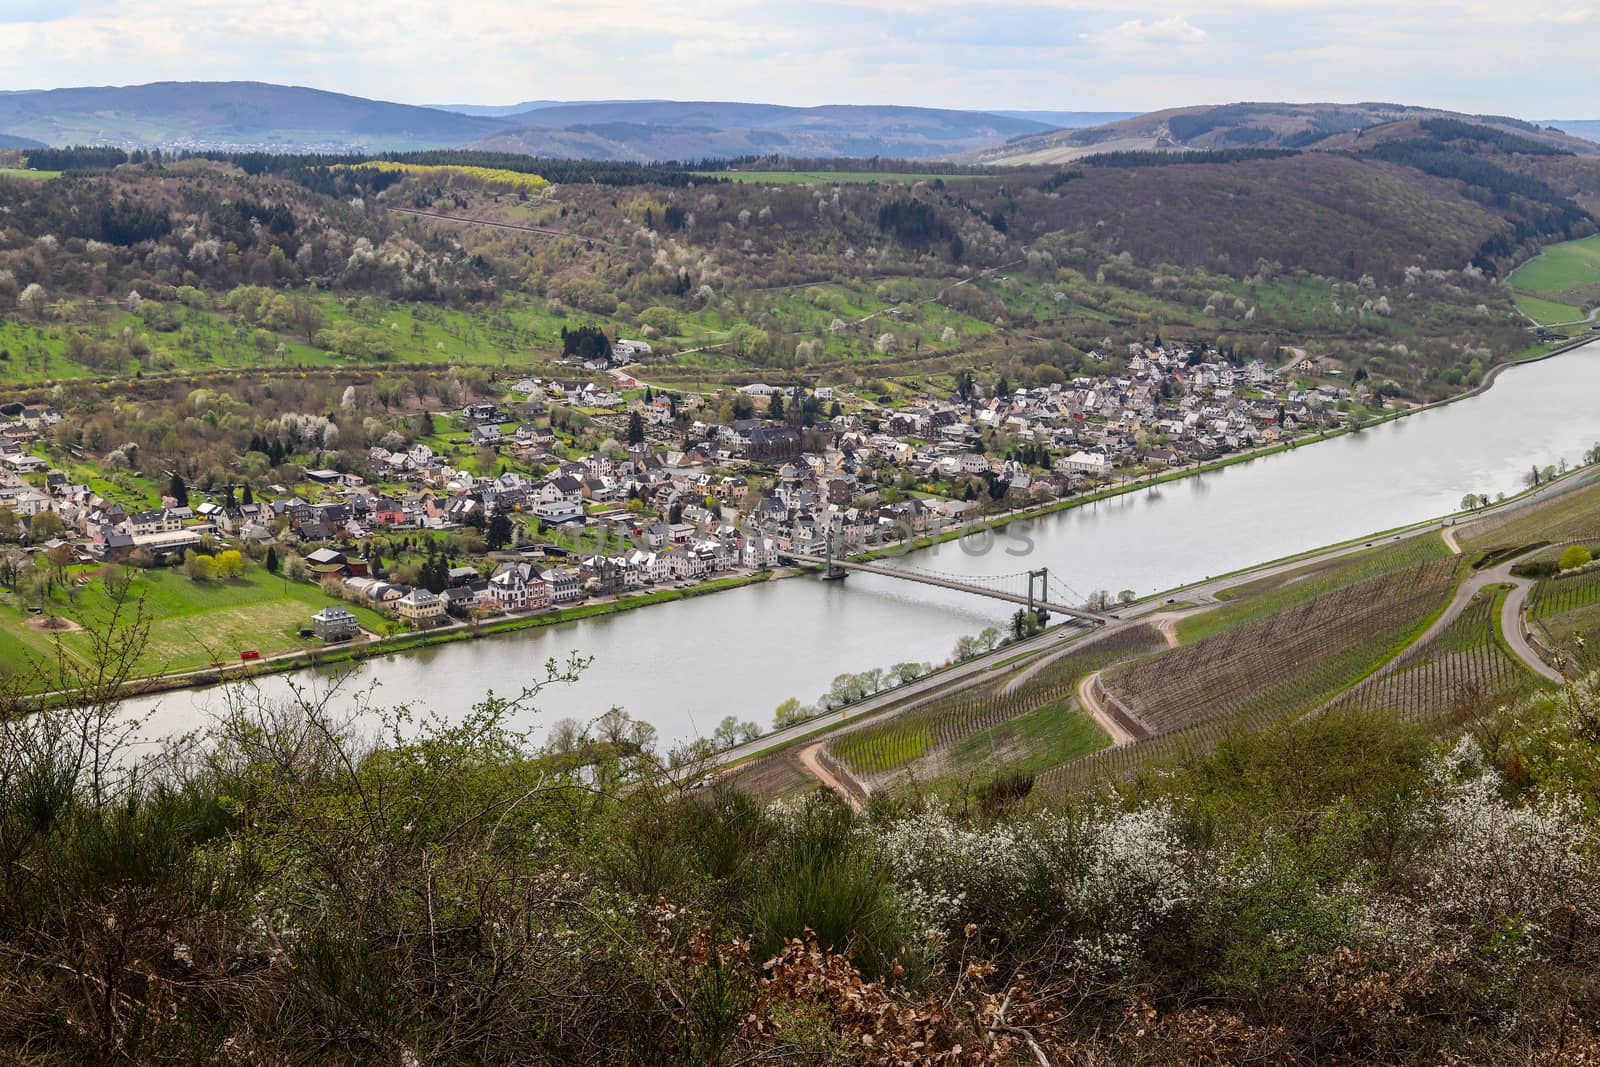 Bernkastel-Kues - Wehlen at river Mosel by reinerc